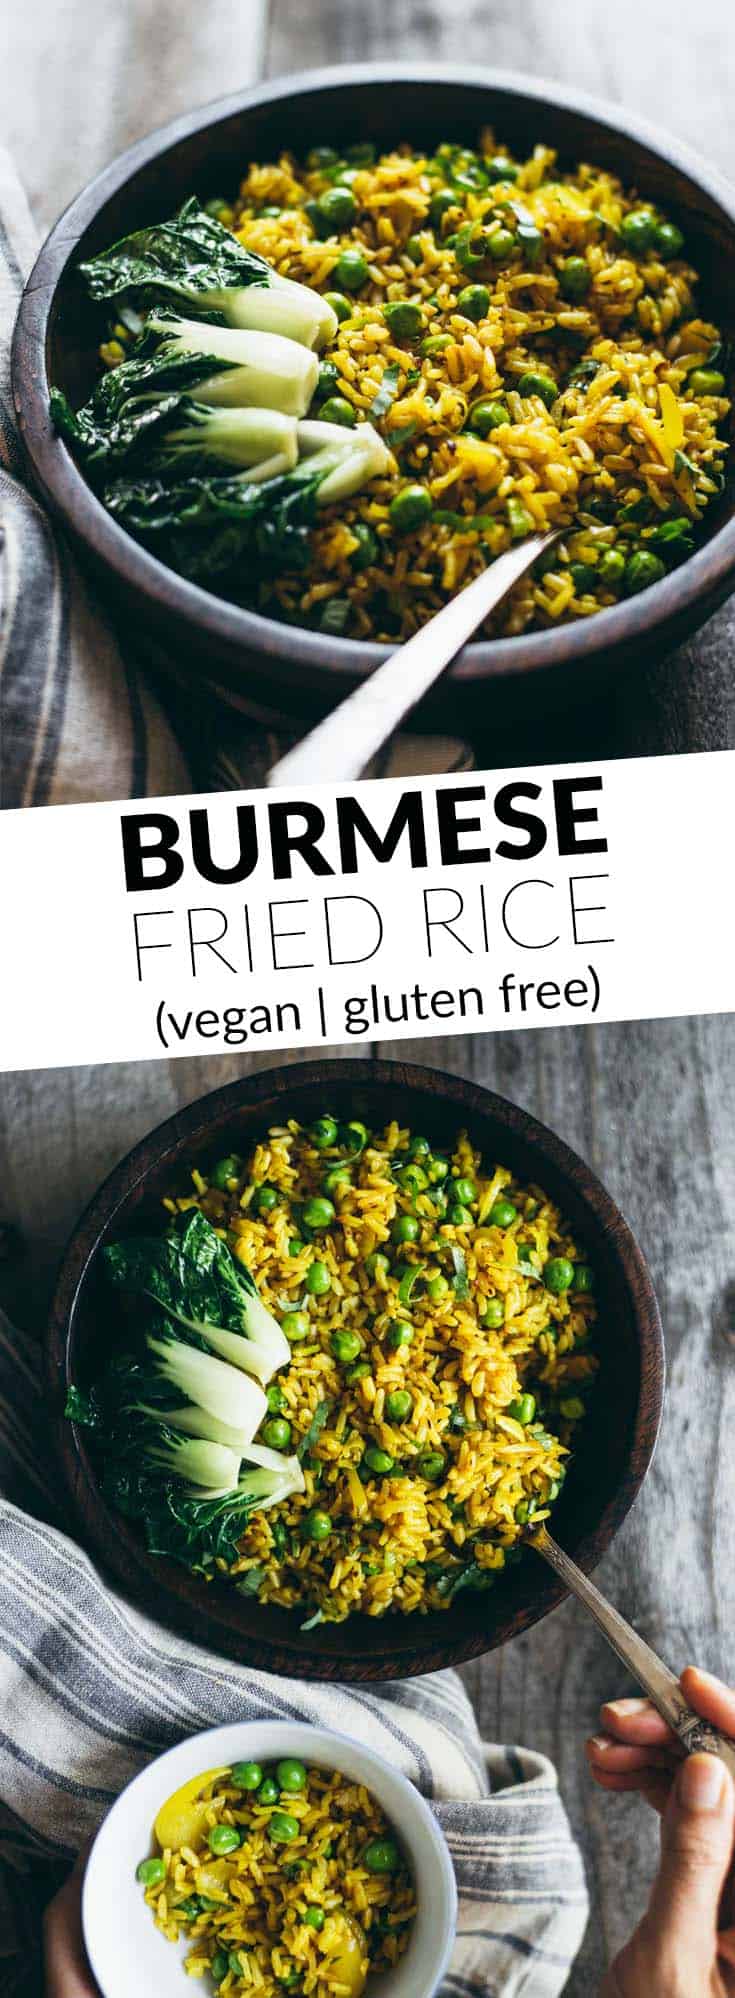 Burmese Fried Rice - a quick and healthy vegan fried rice with shallots, peas, and turmeric! by @healthynibs